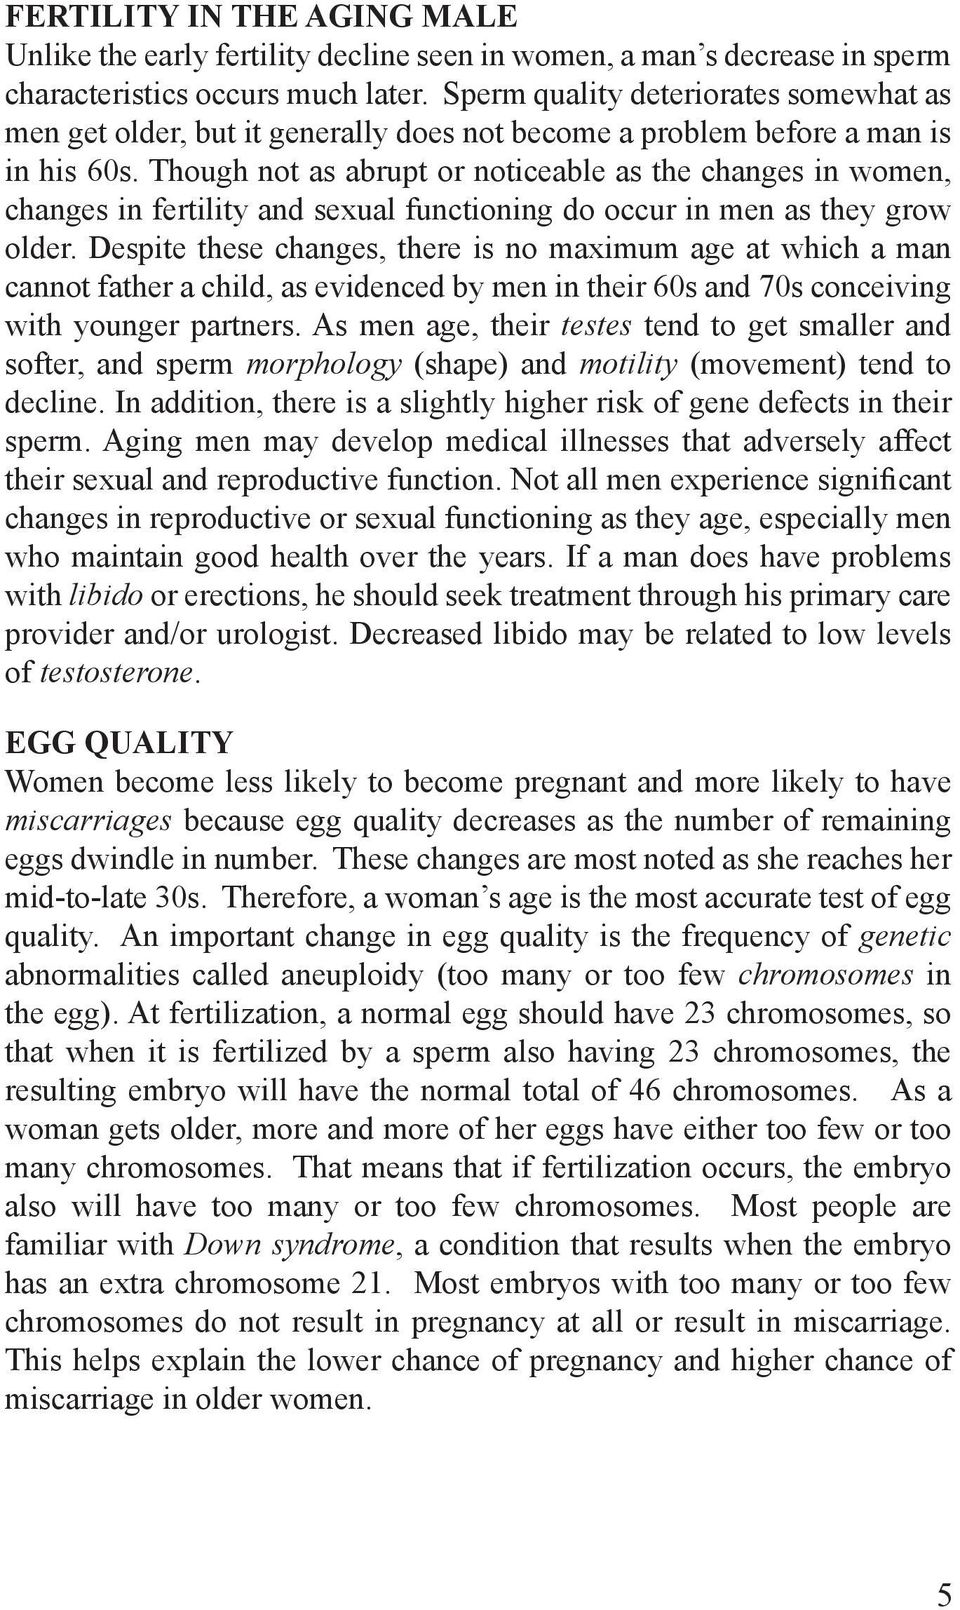 Though not as abrupt or noticeable as the changes in women, changes in fertility and sexual functioning do occur in men as they grow older.